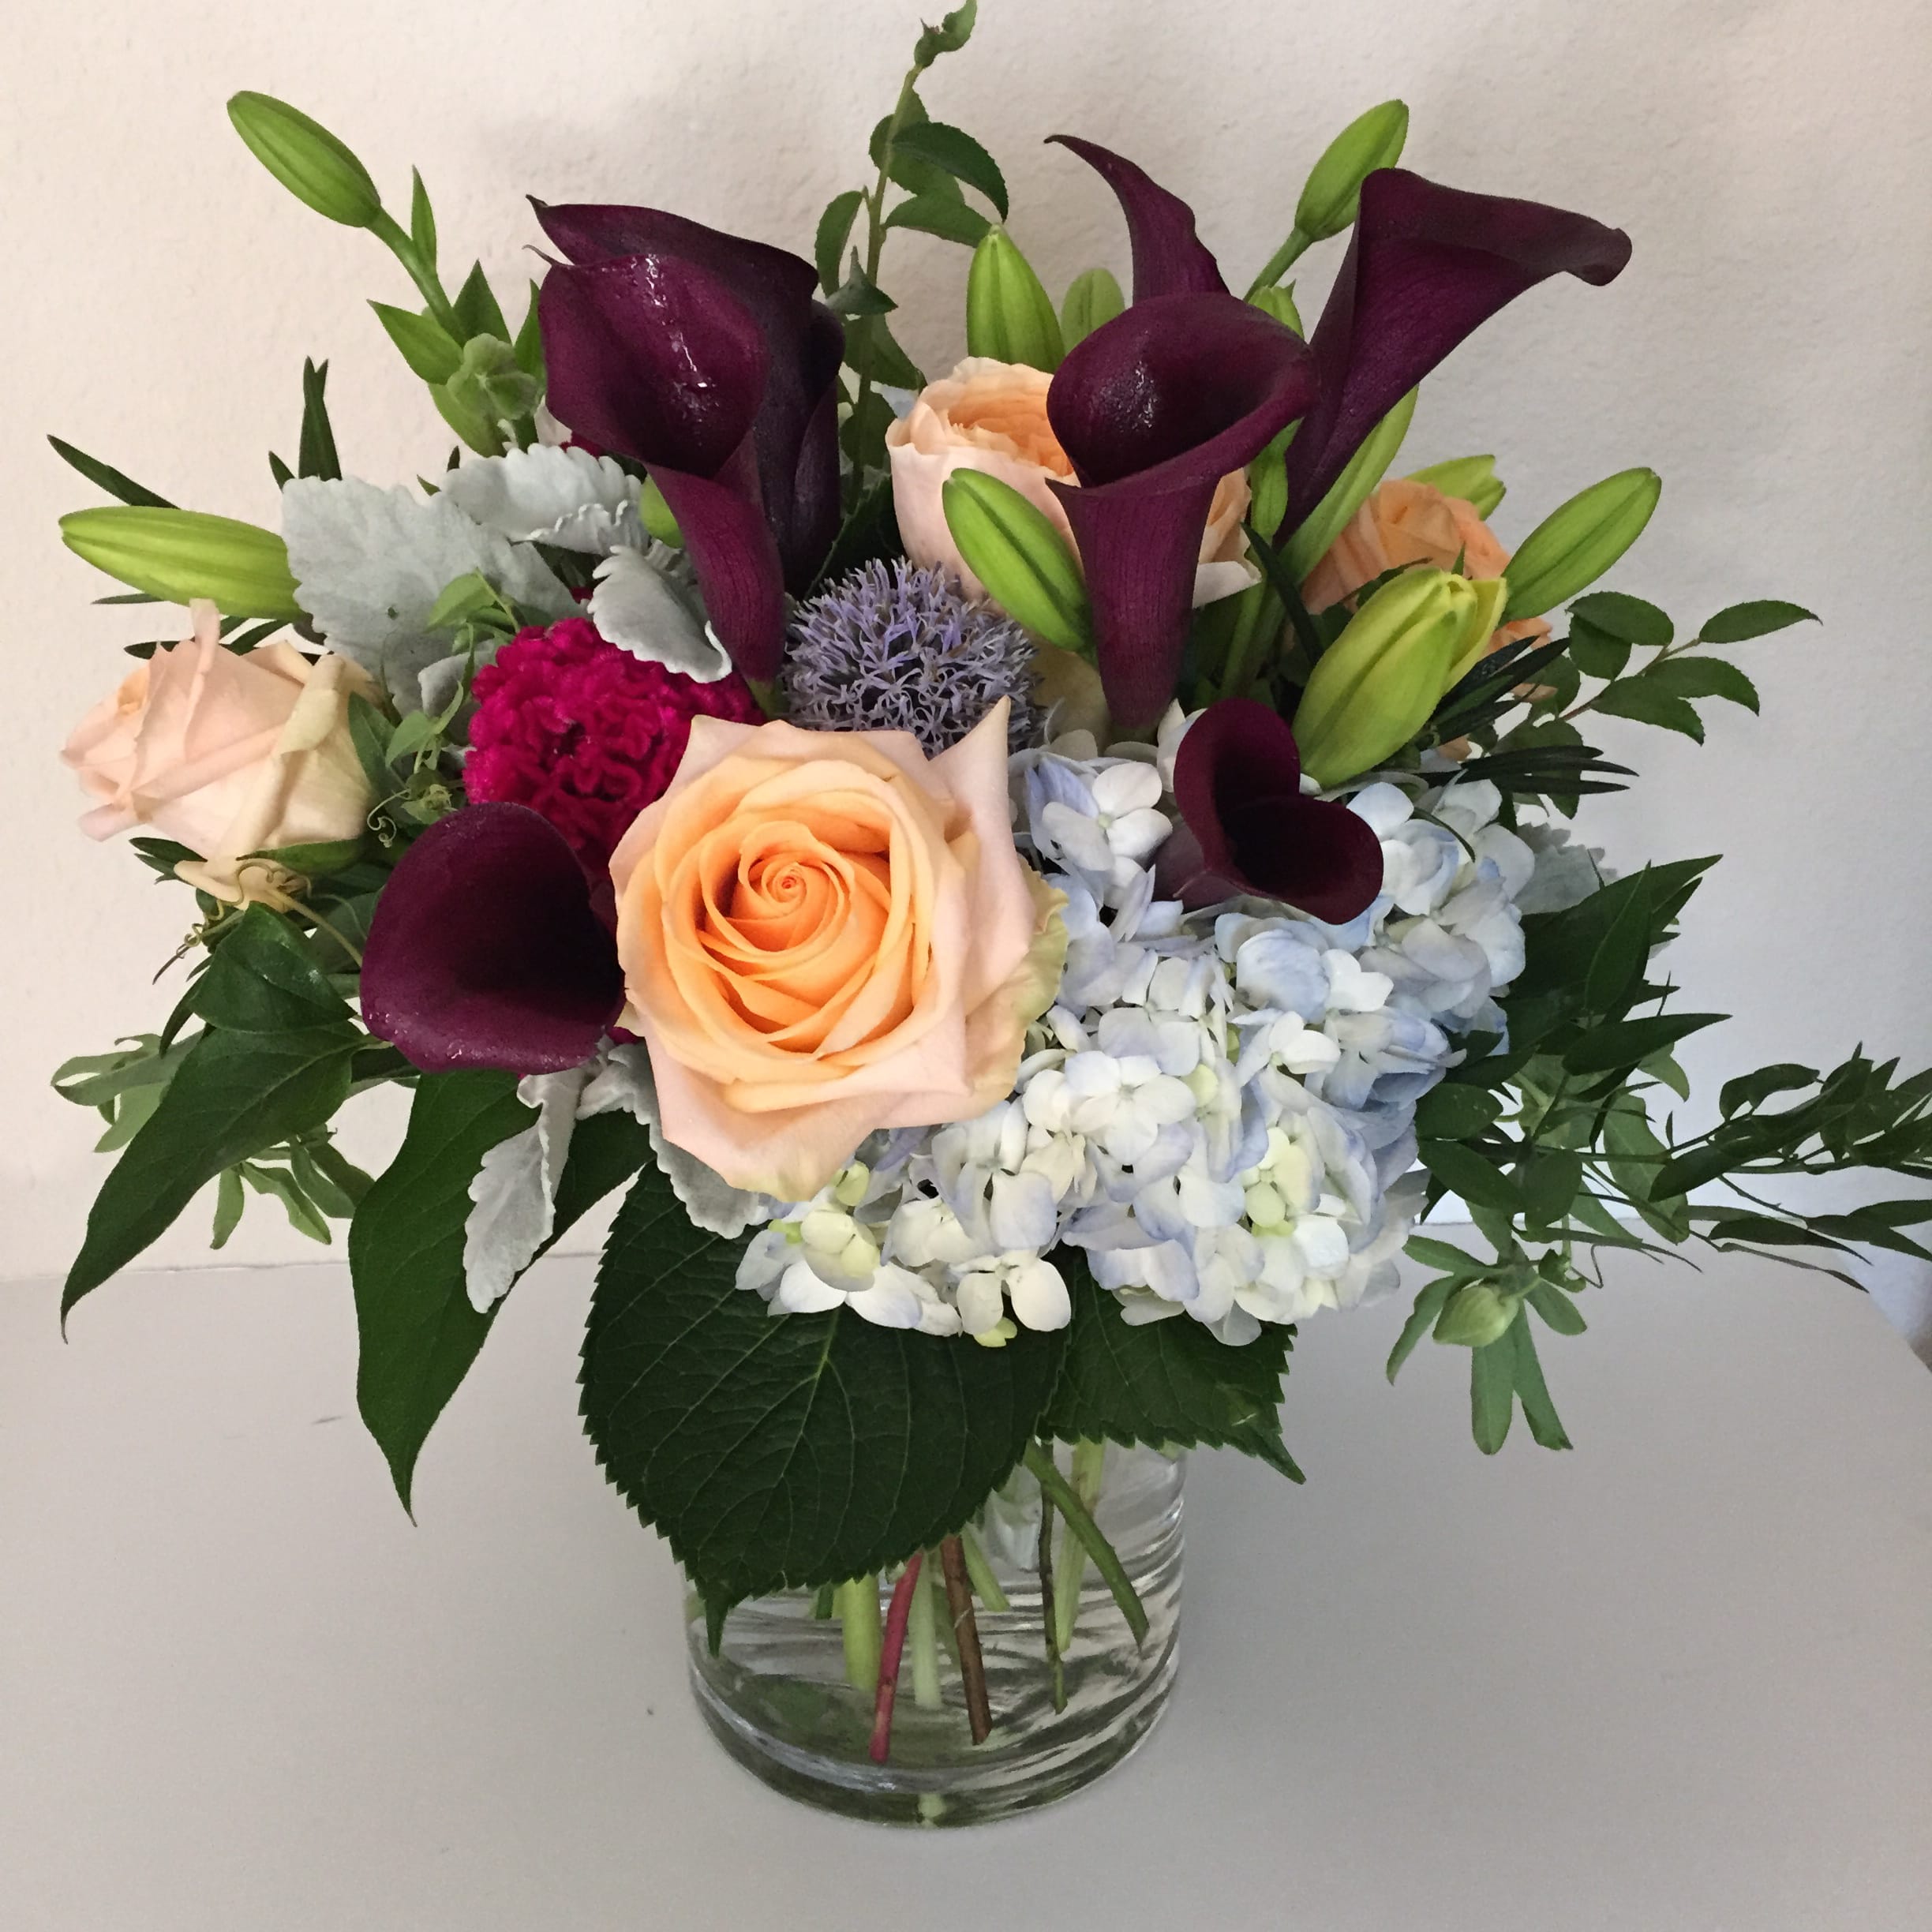 Summer Jump - Roses, hydrangea and callas mix it up for a beautiful end-of-summer/early fall combination